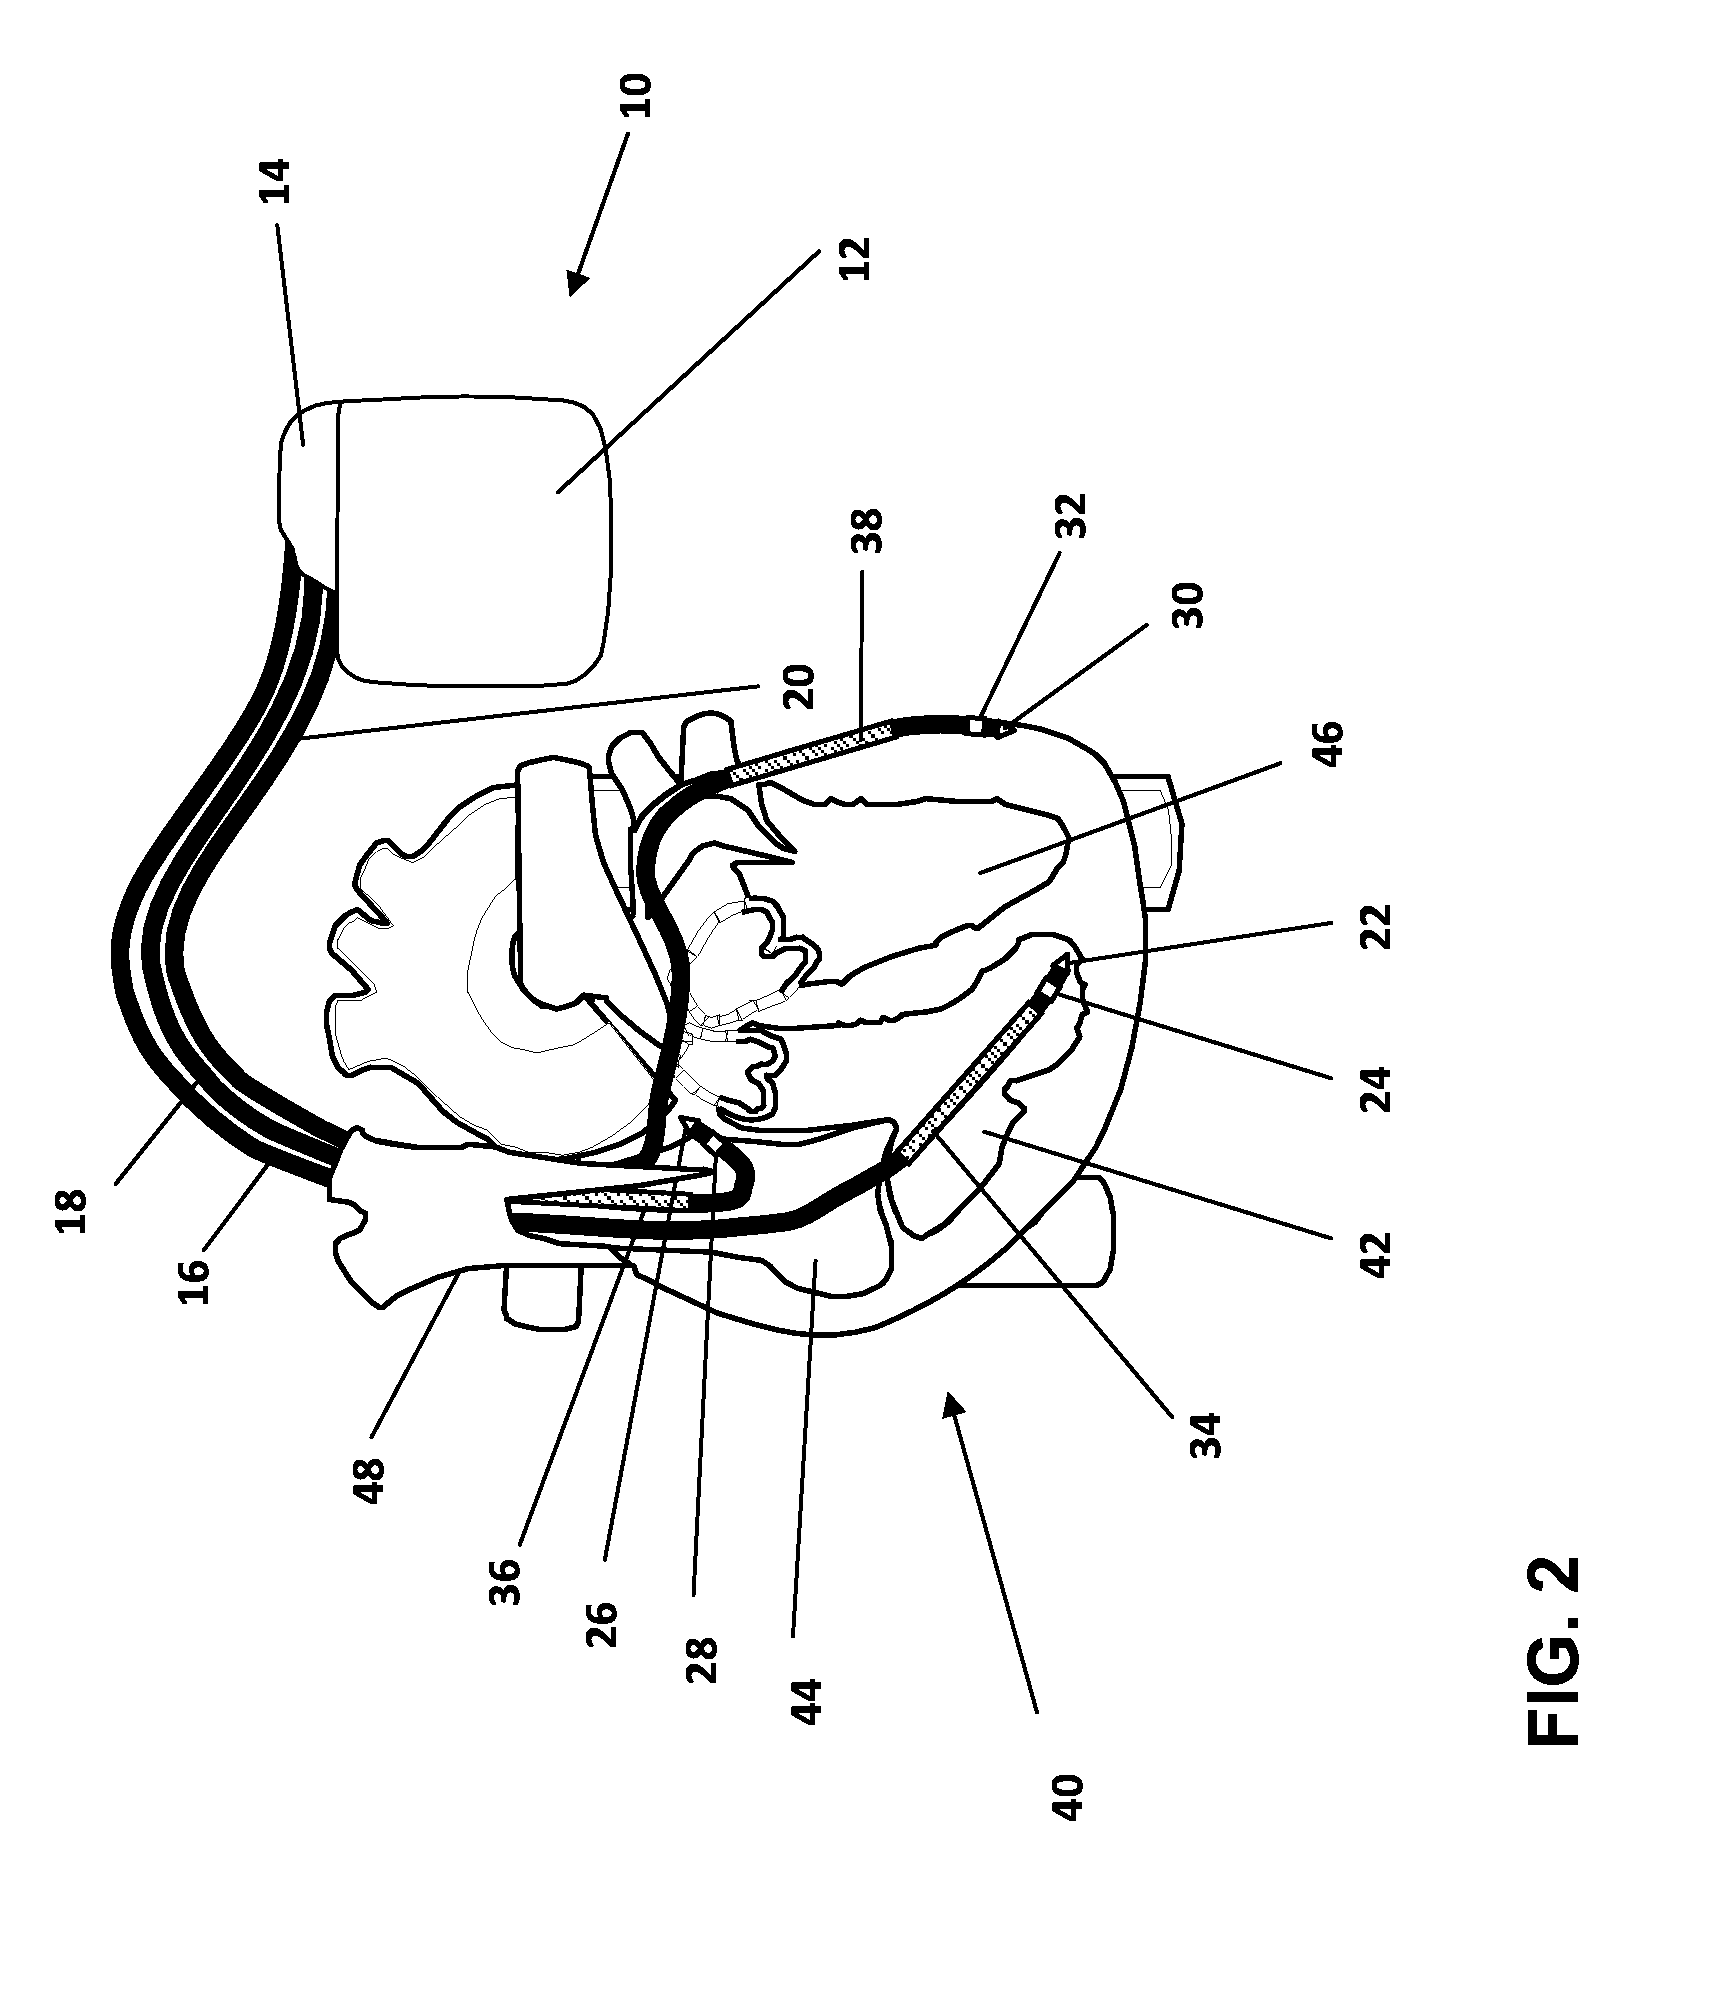 Implantable heart stimulator and method for trending analysis of ventricular activation time